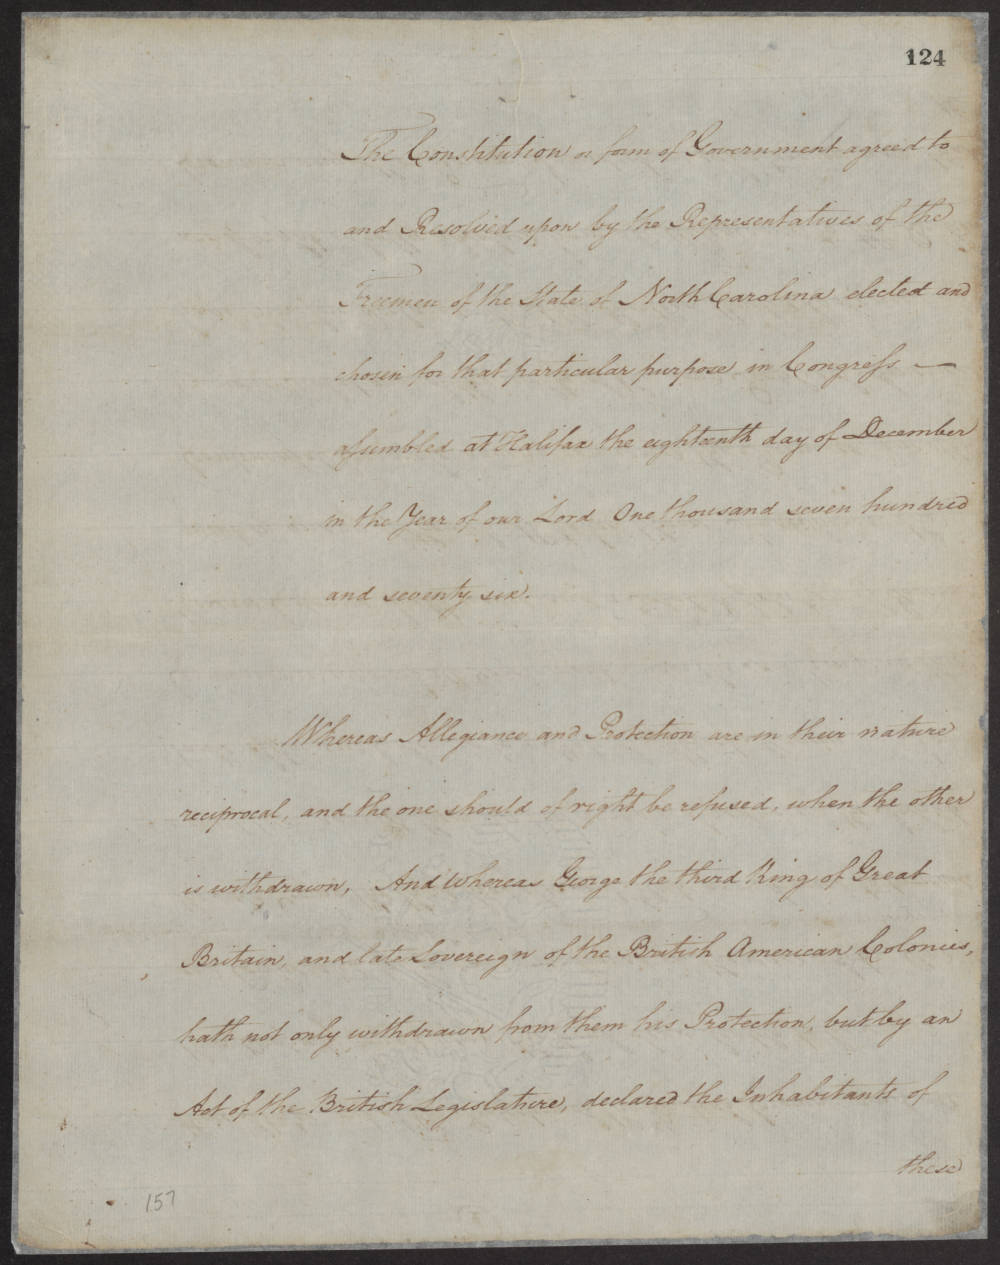 The first North Carolina State Constitution, written in 1776